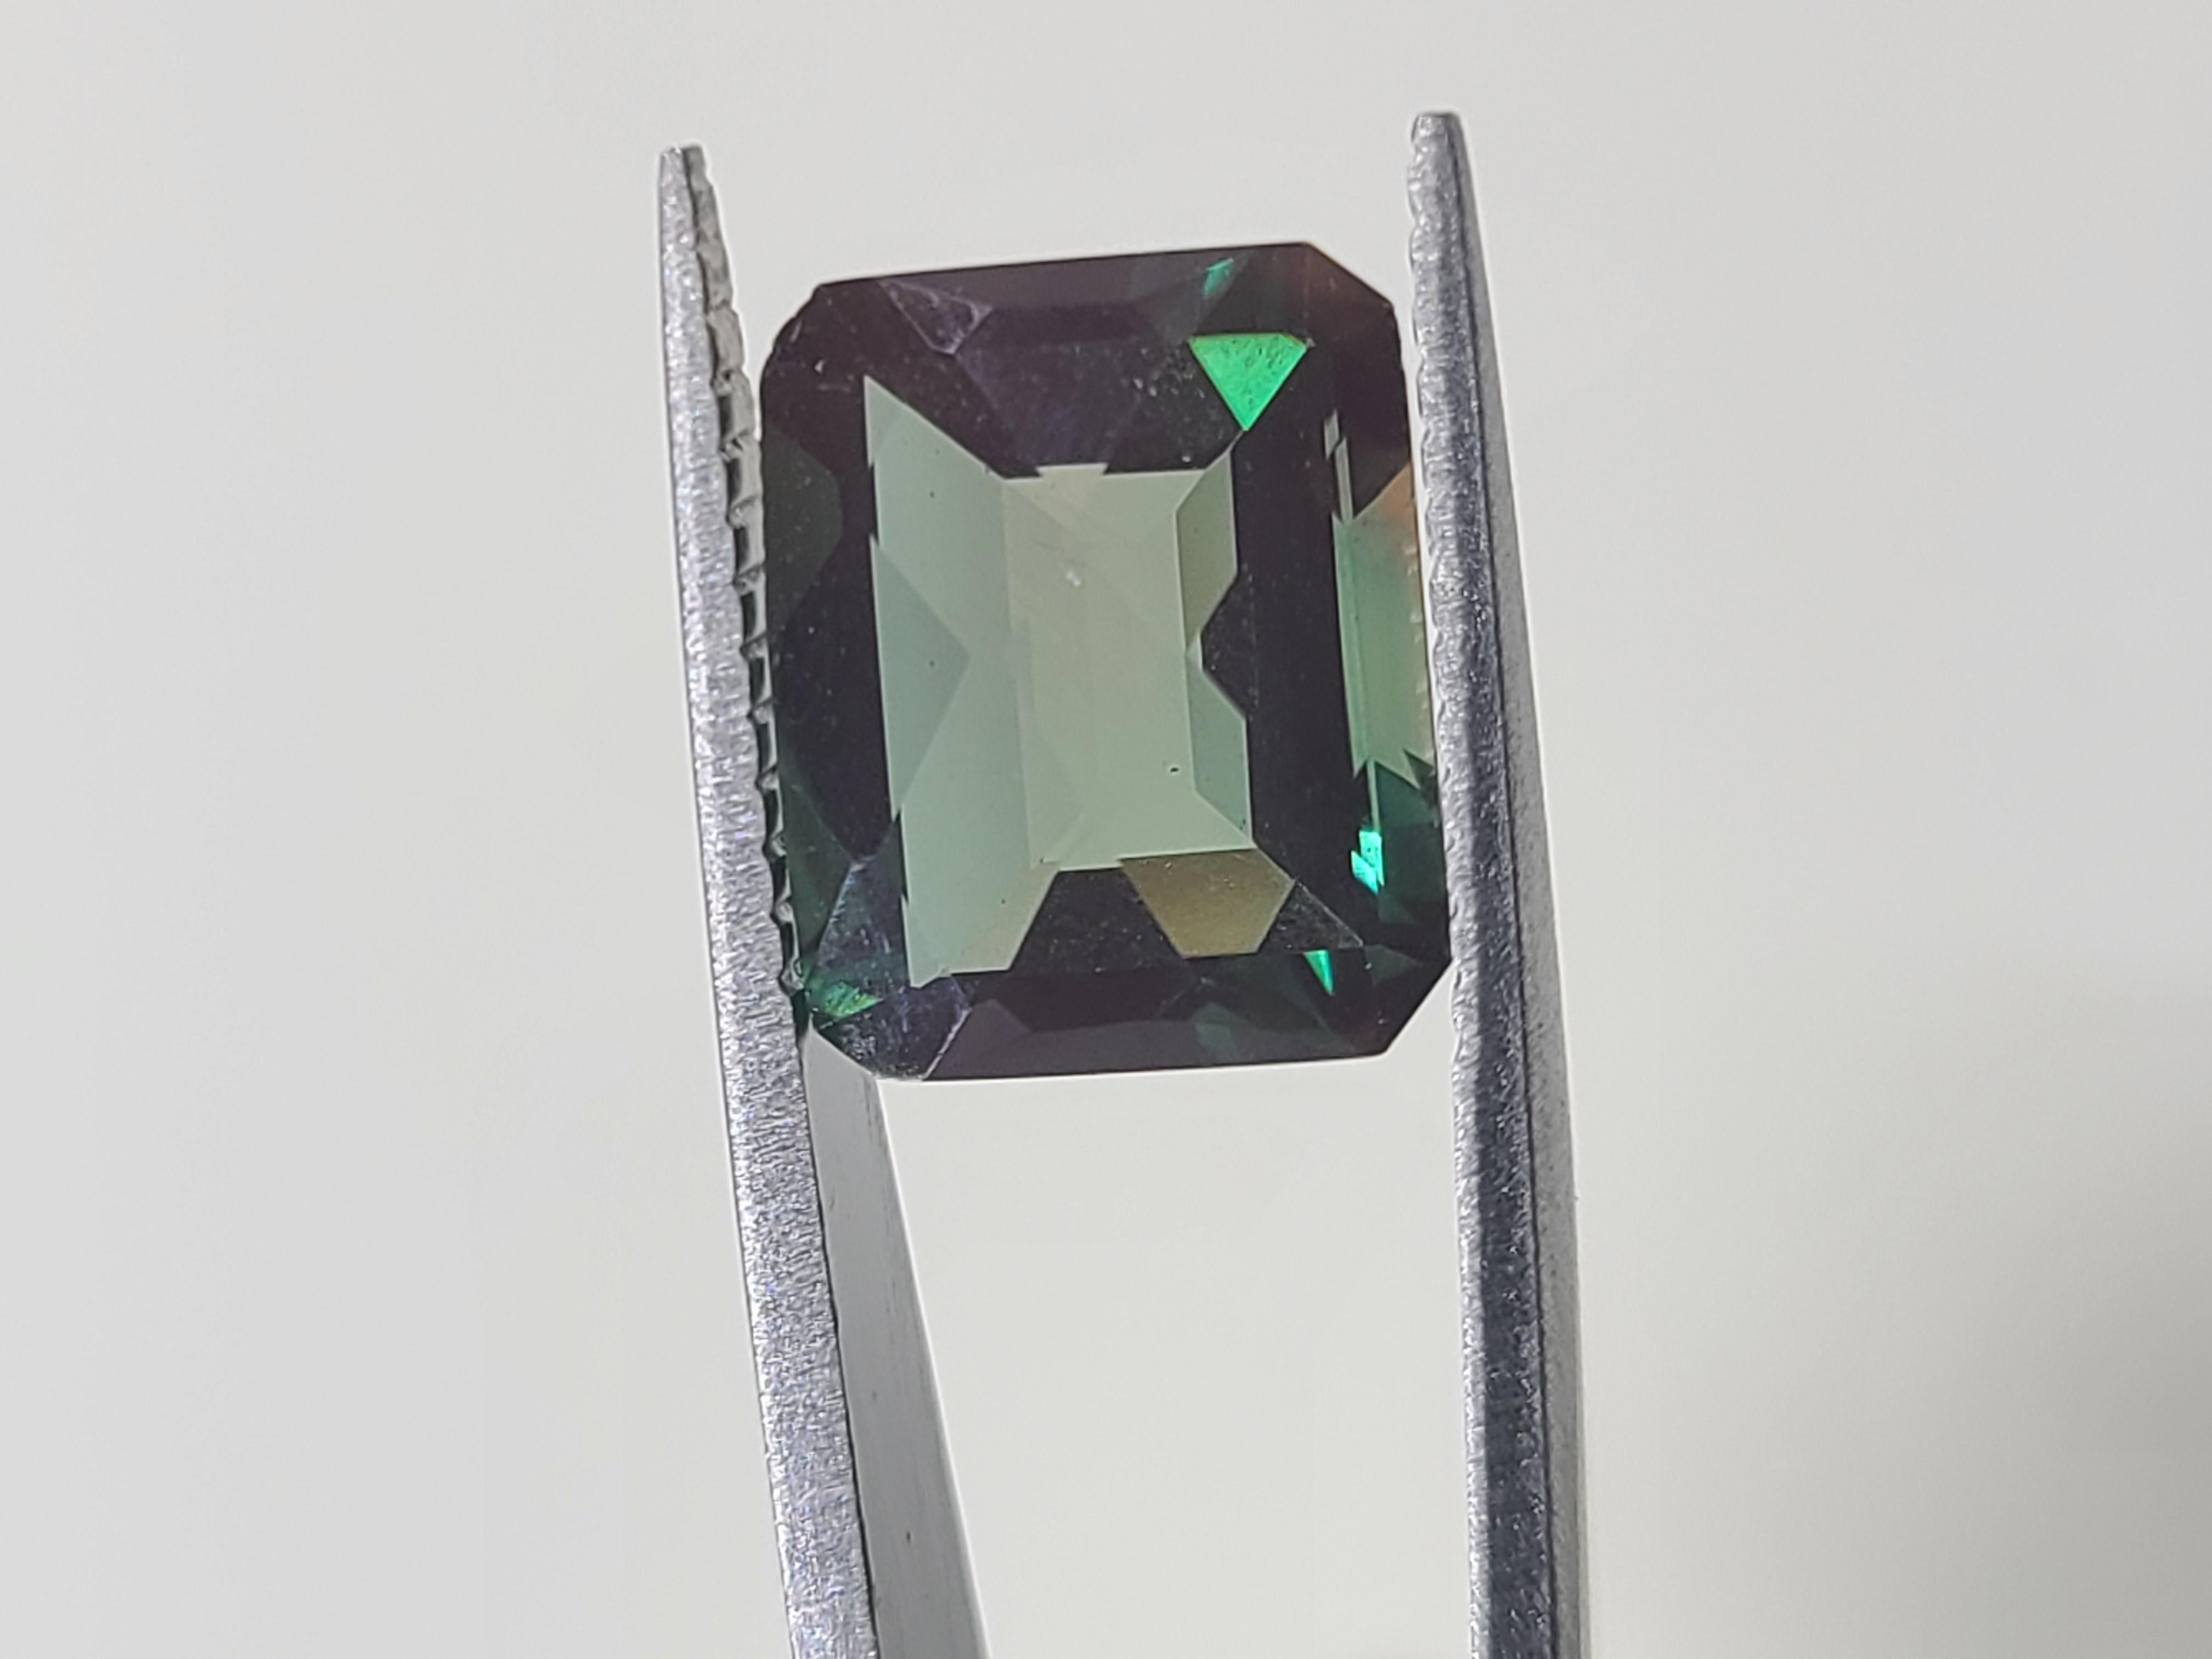 This gemstone comes from the estate of a private collector.
It's a emerald cut Green Andesine Labradorite.
It measures 11x9mm with a 5.2mm depth and it weighs 3.4 carats.
